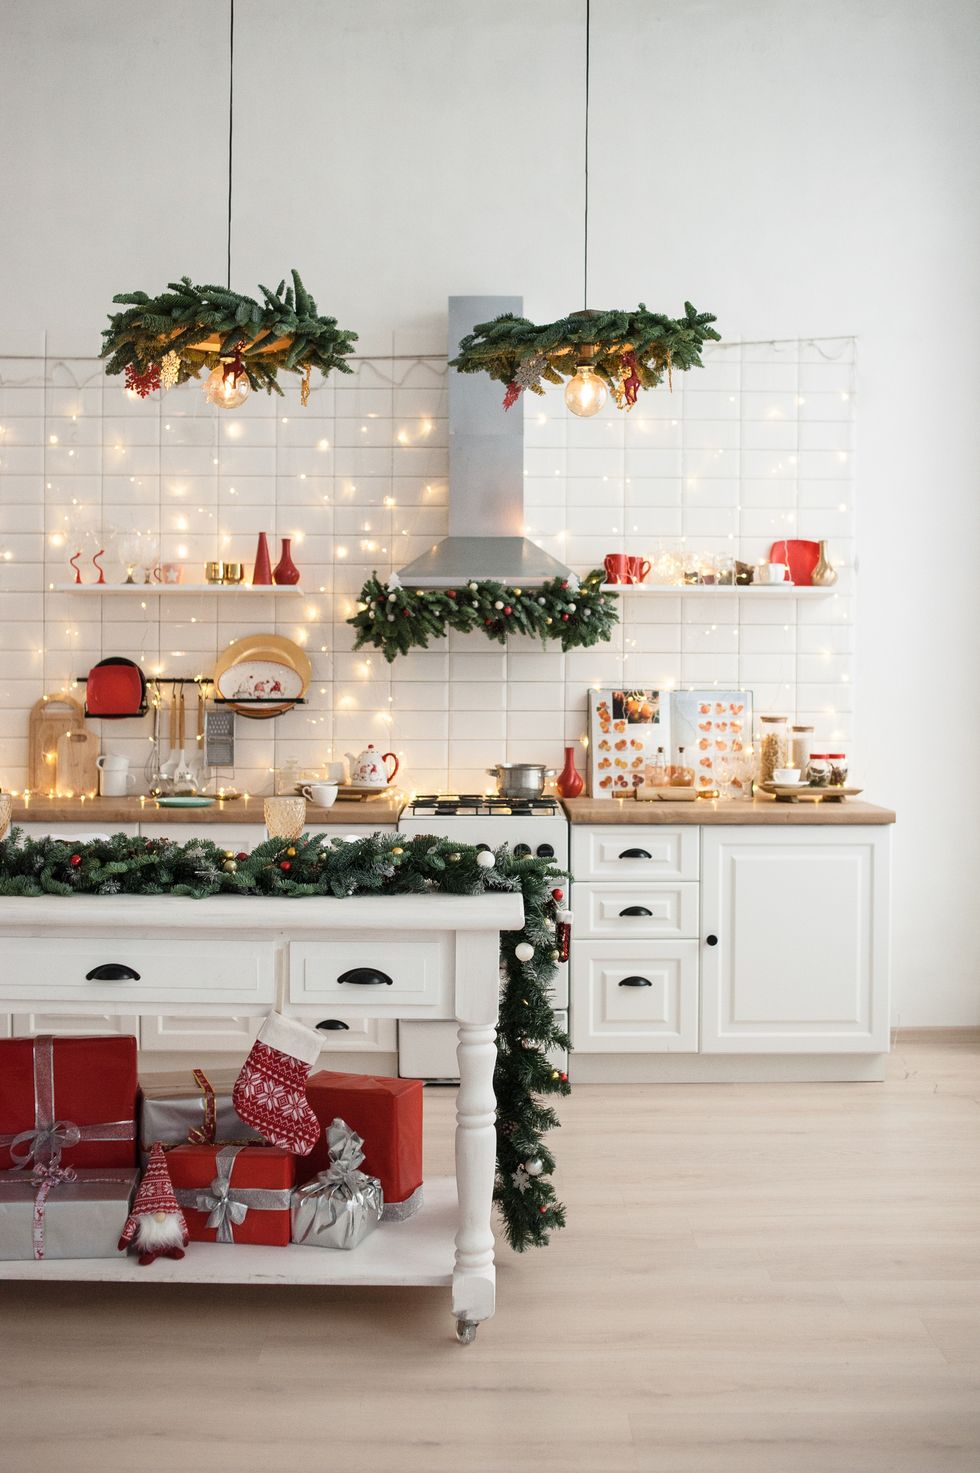 Christmas Kitchen Decorating: Silver, Gold + Greenery